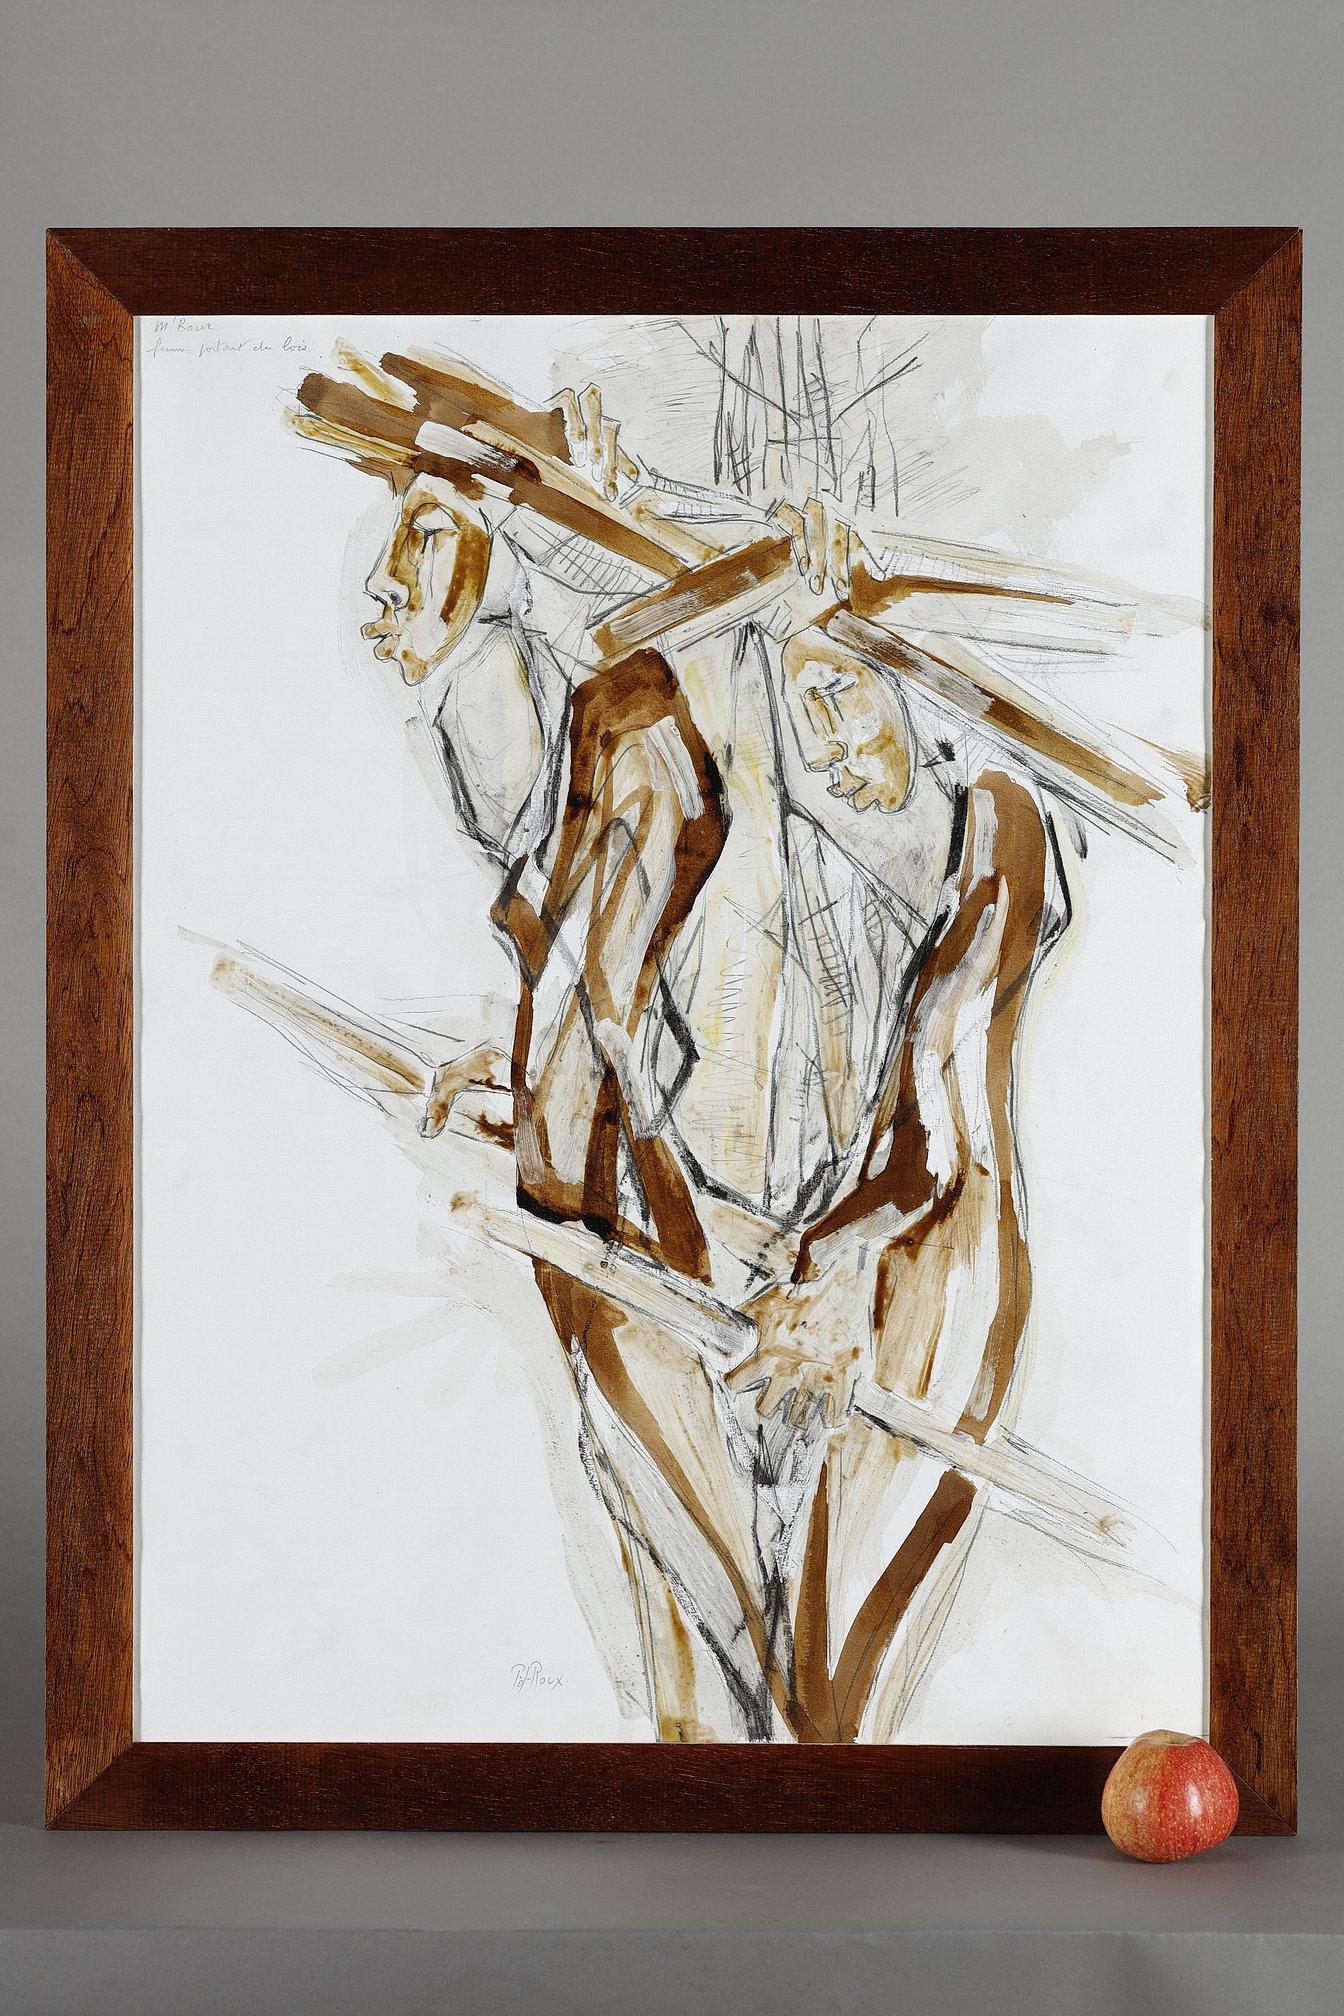 Pencil drawing enhanced with paint on paper mounted on a plywood support and frame, signed by Pôl Roux and titled 